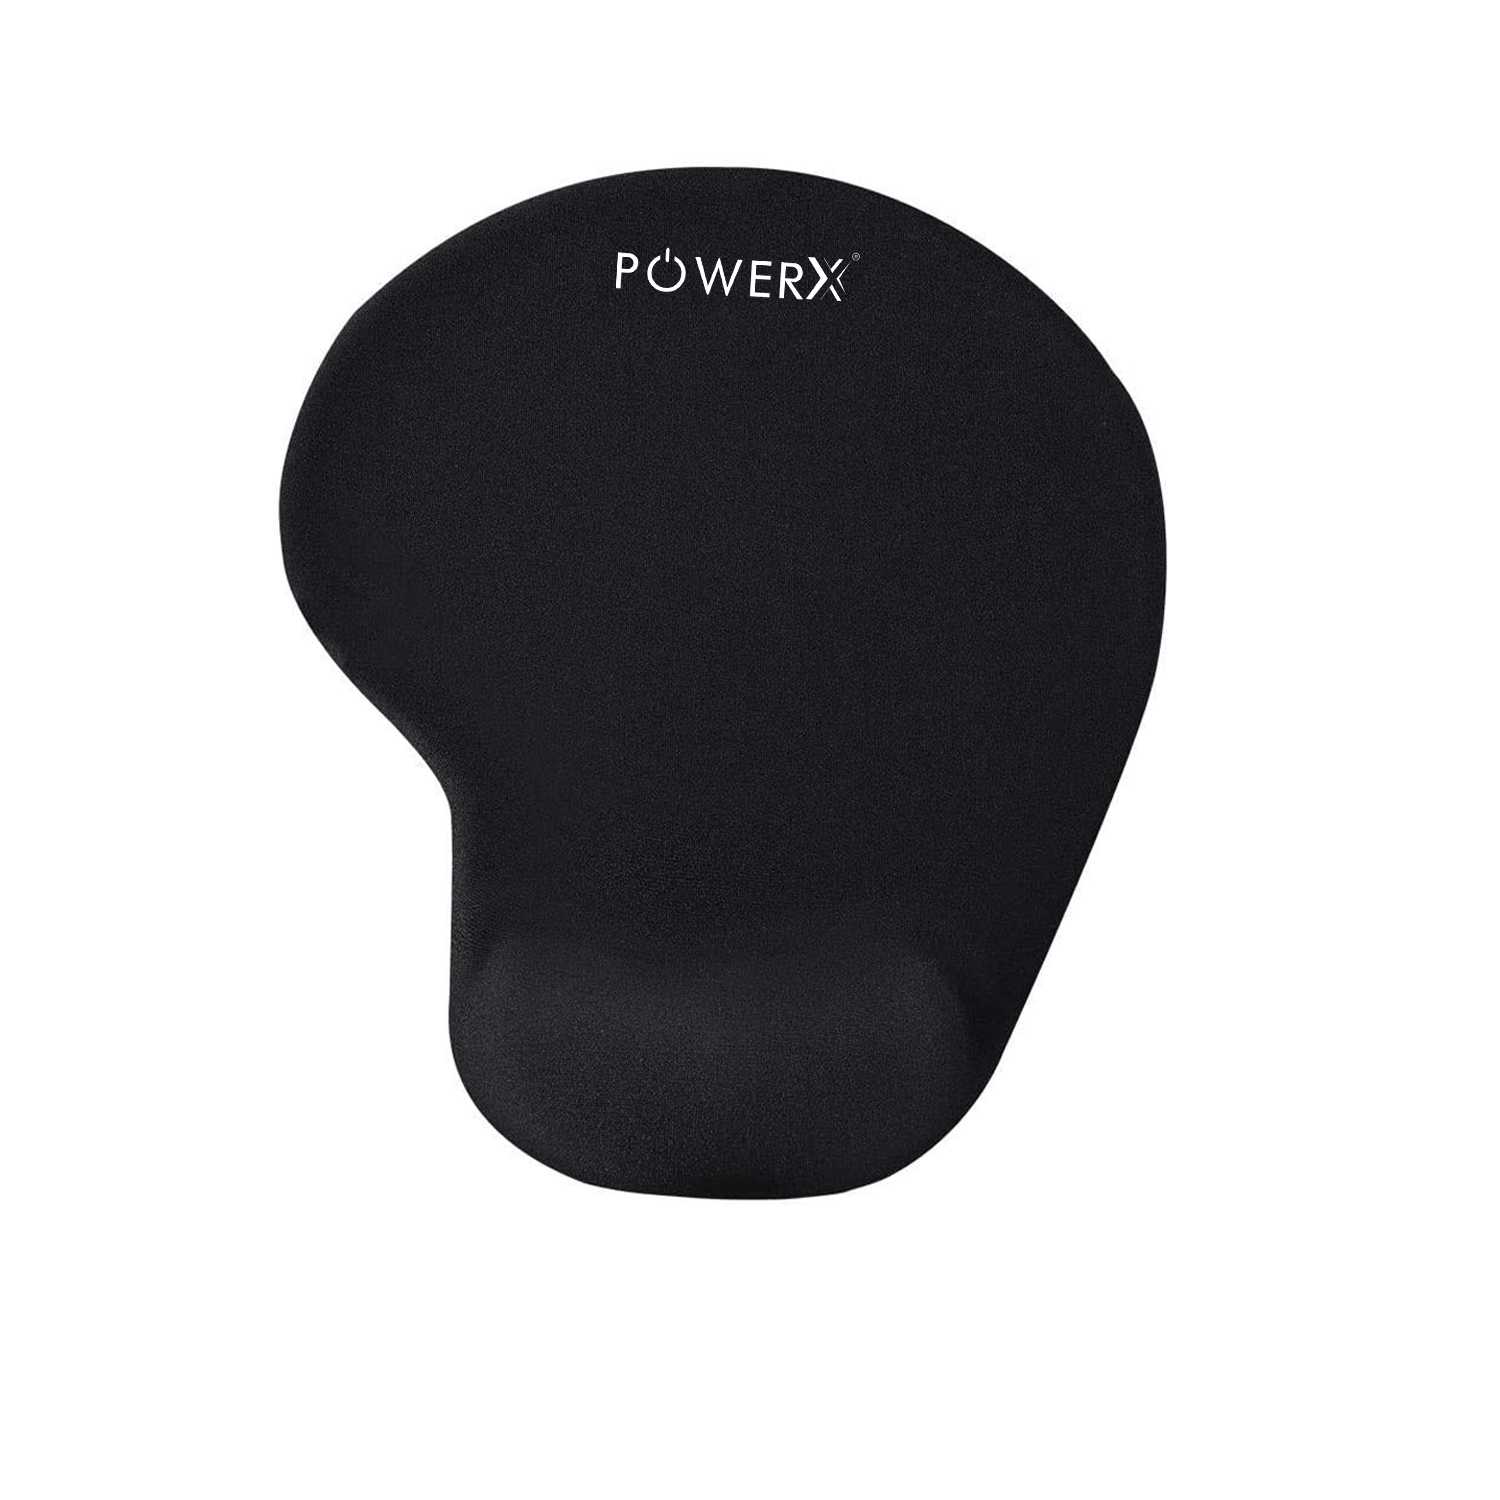 POWER X MOUSE PAD WITH GELL